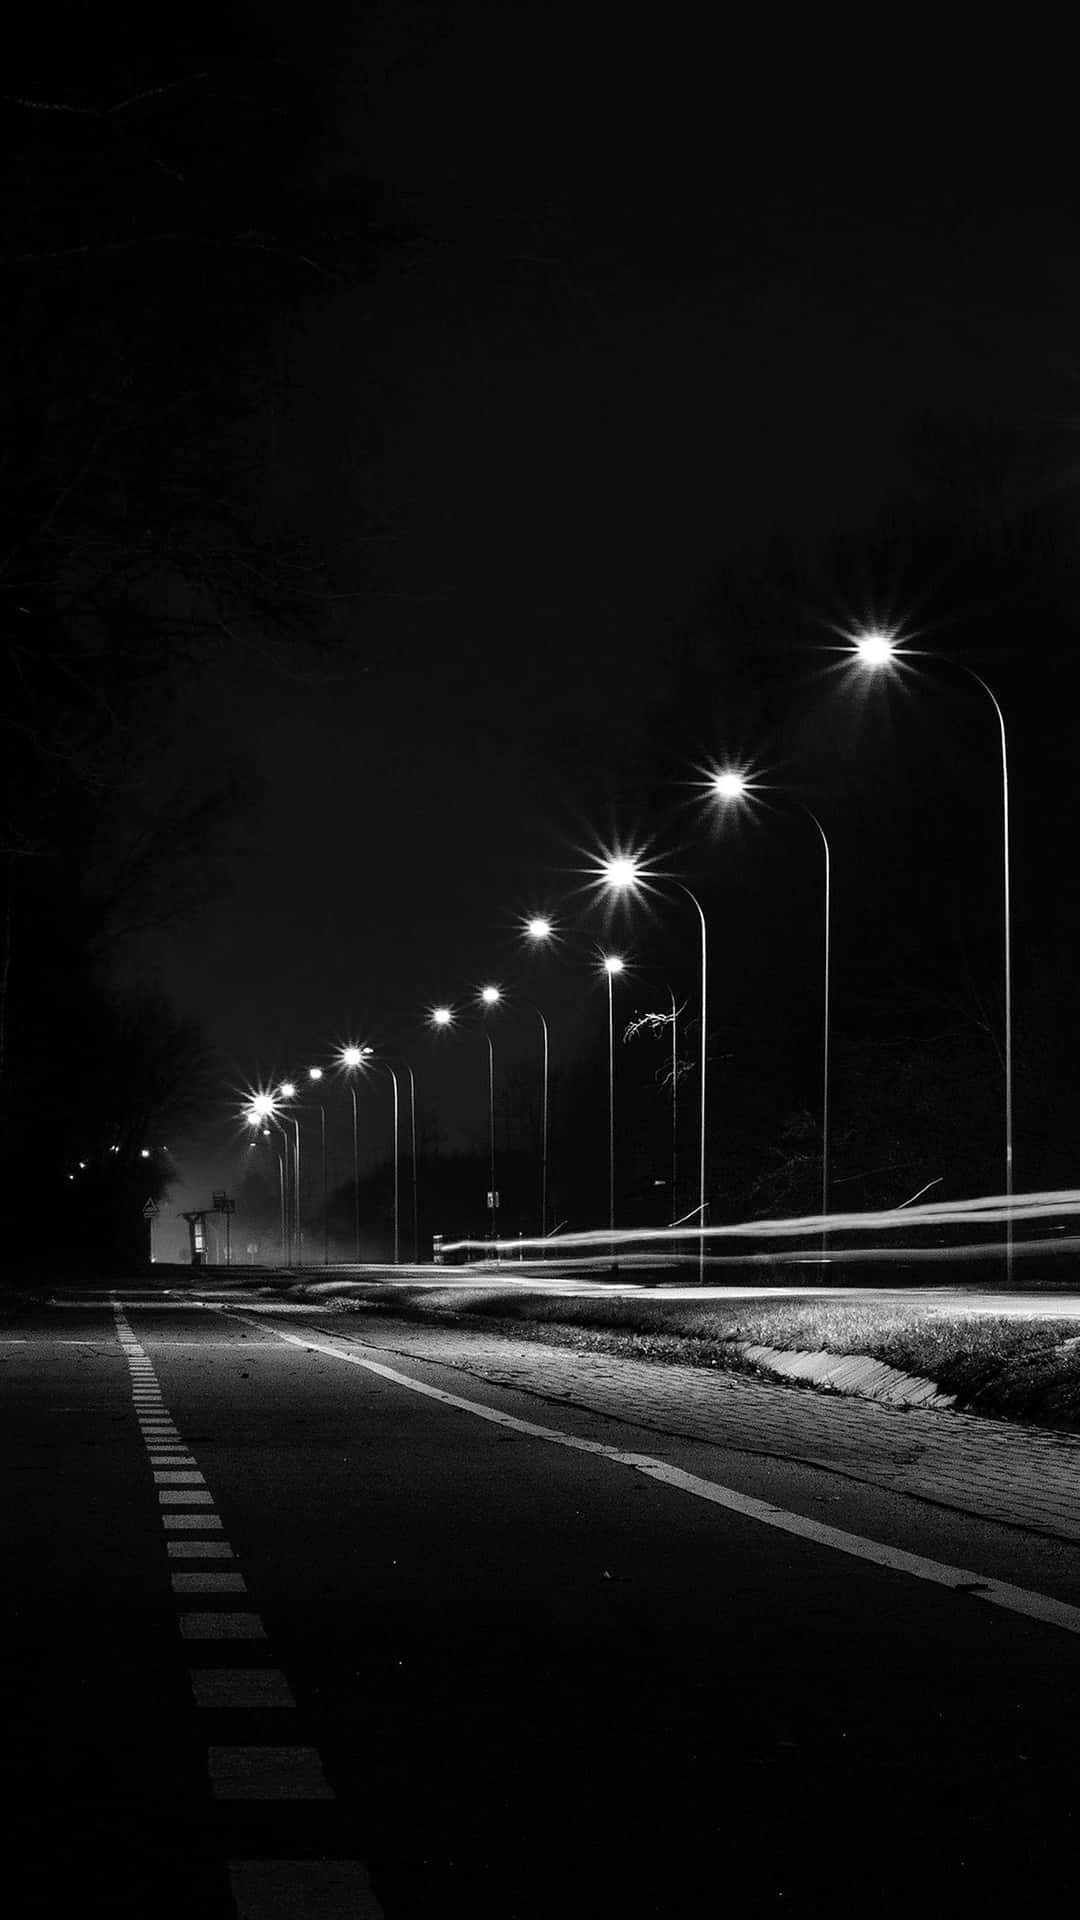 Mysterious black and white city street Wallpaper